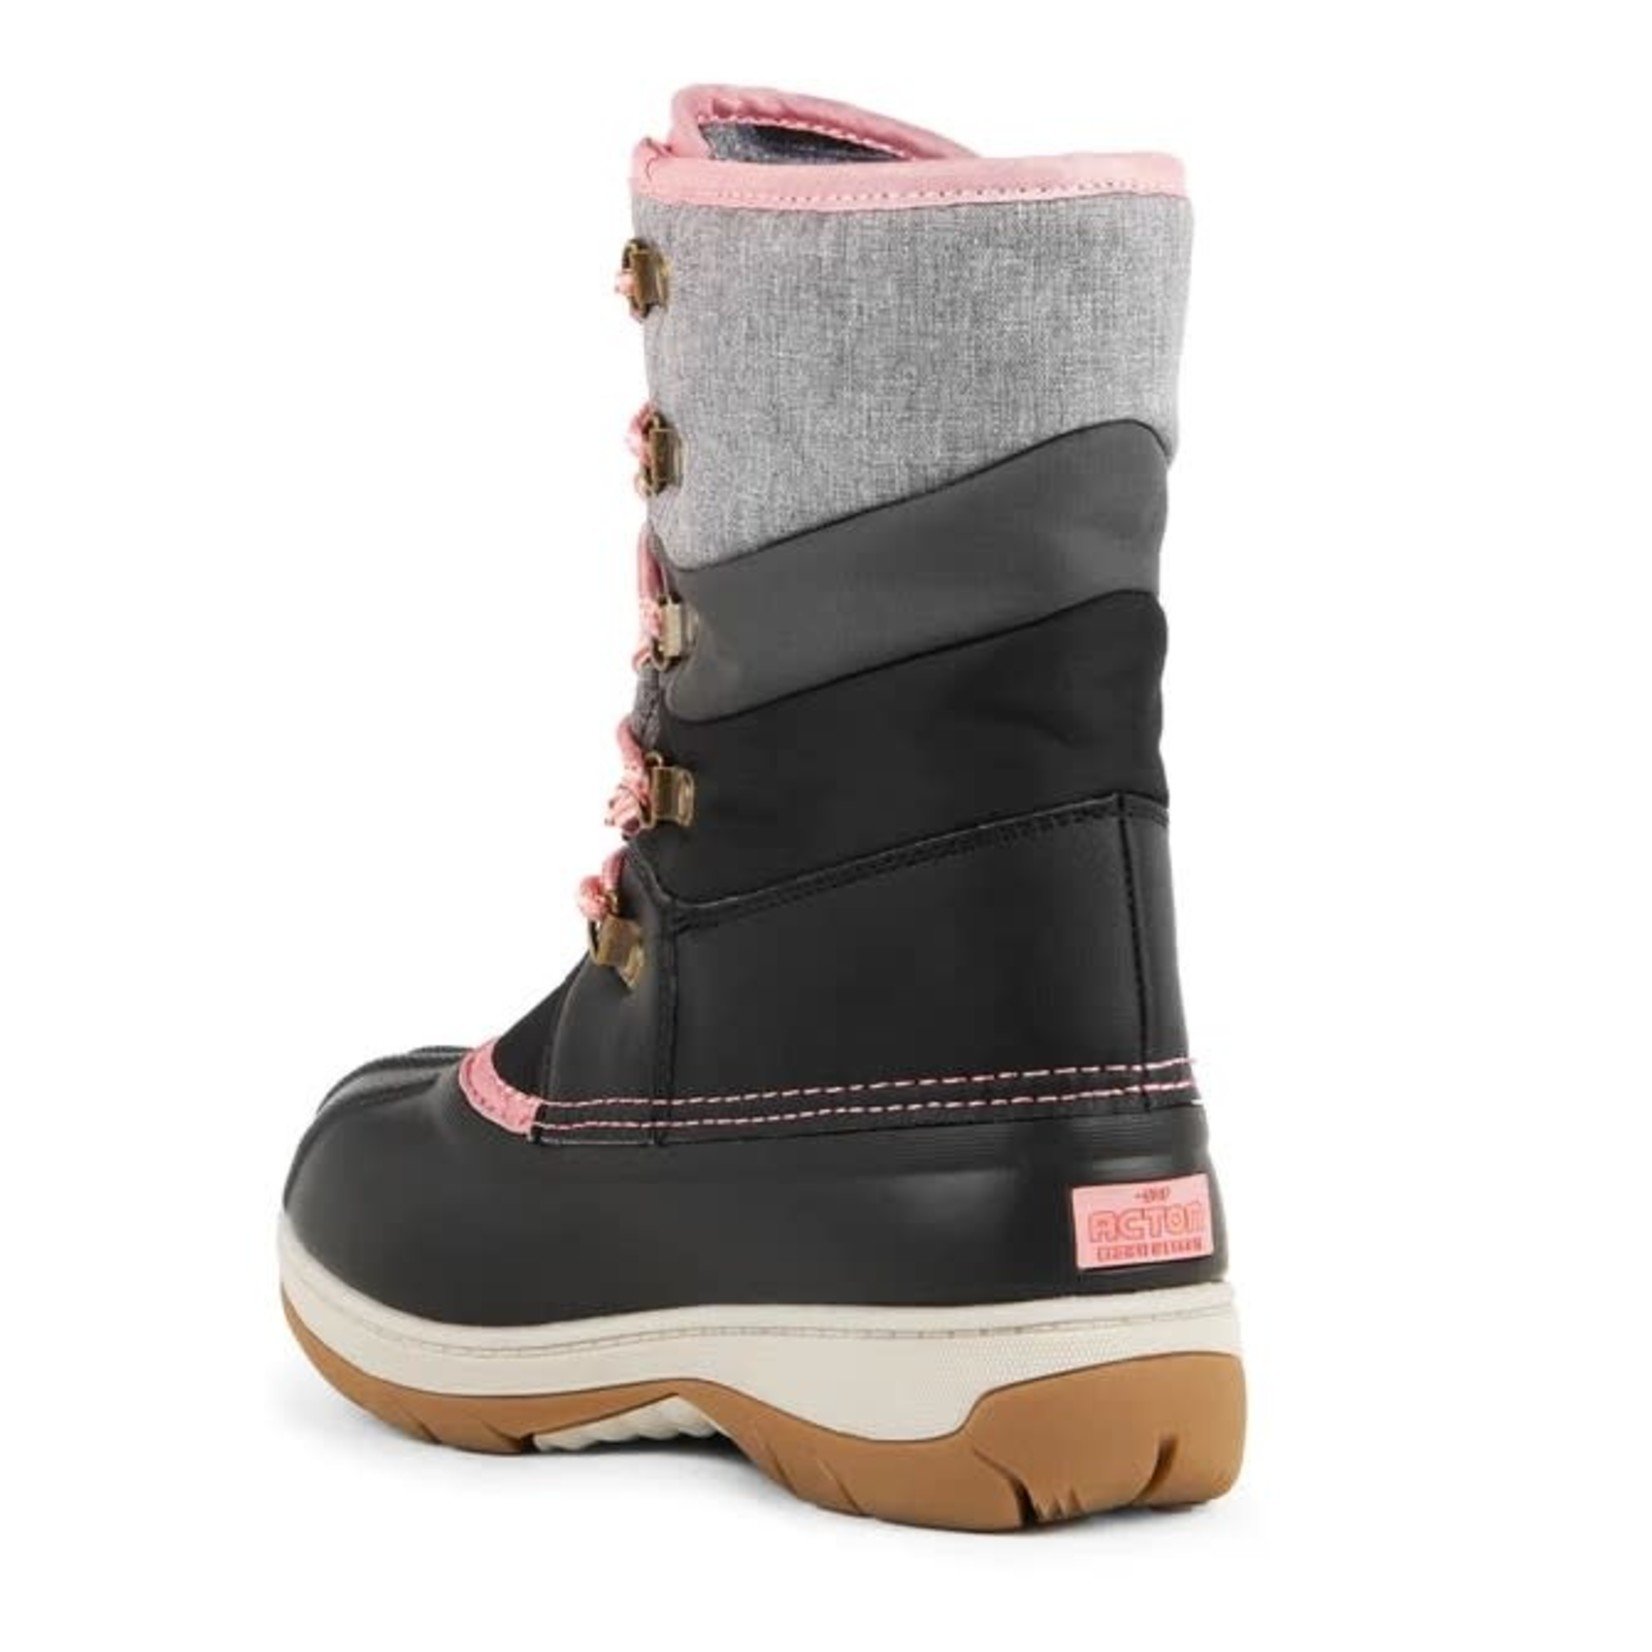 Acton ACTON - Winter Boots 'Gummy - Grey and Pink'